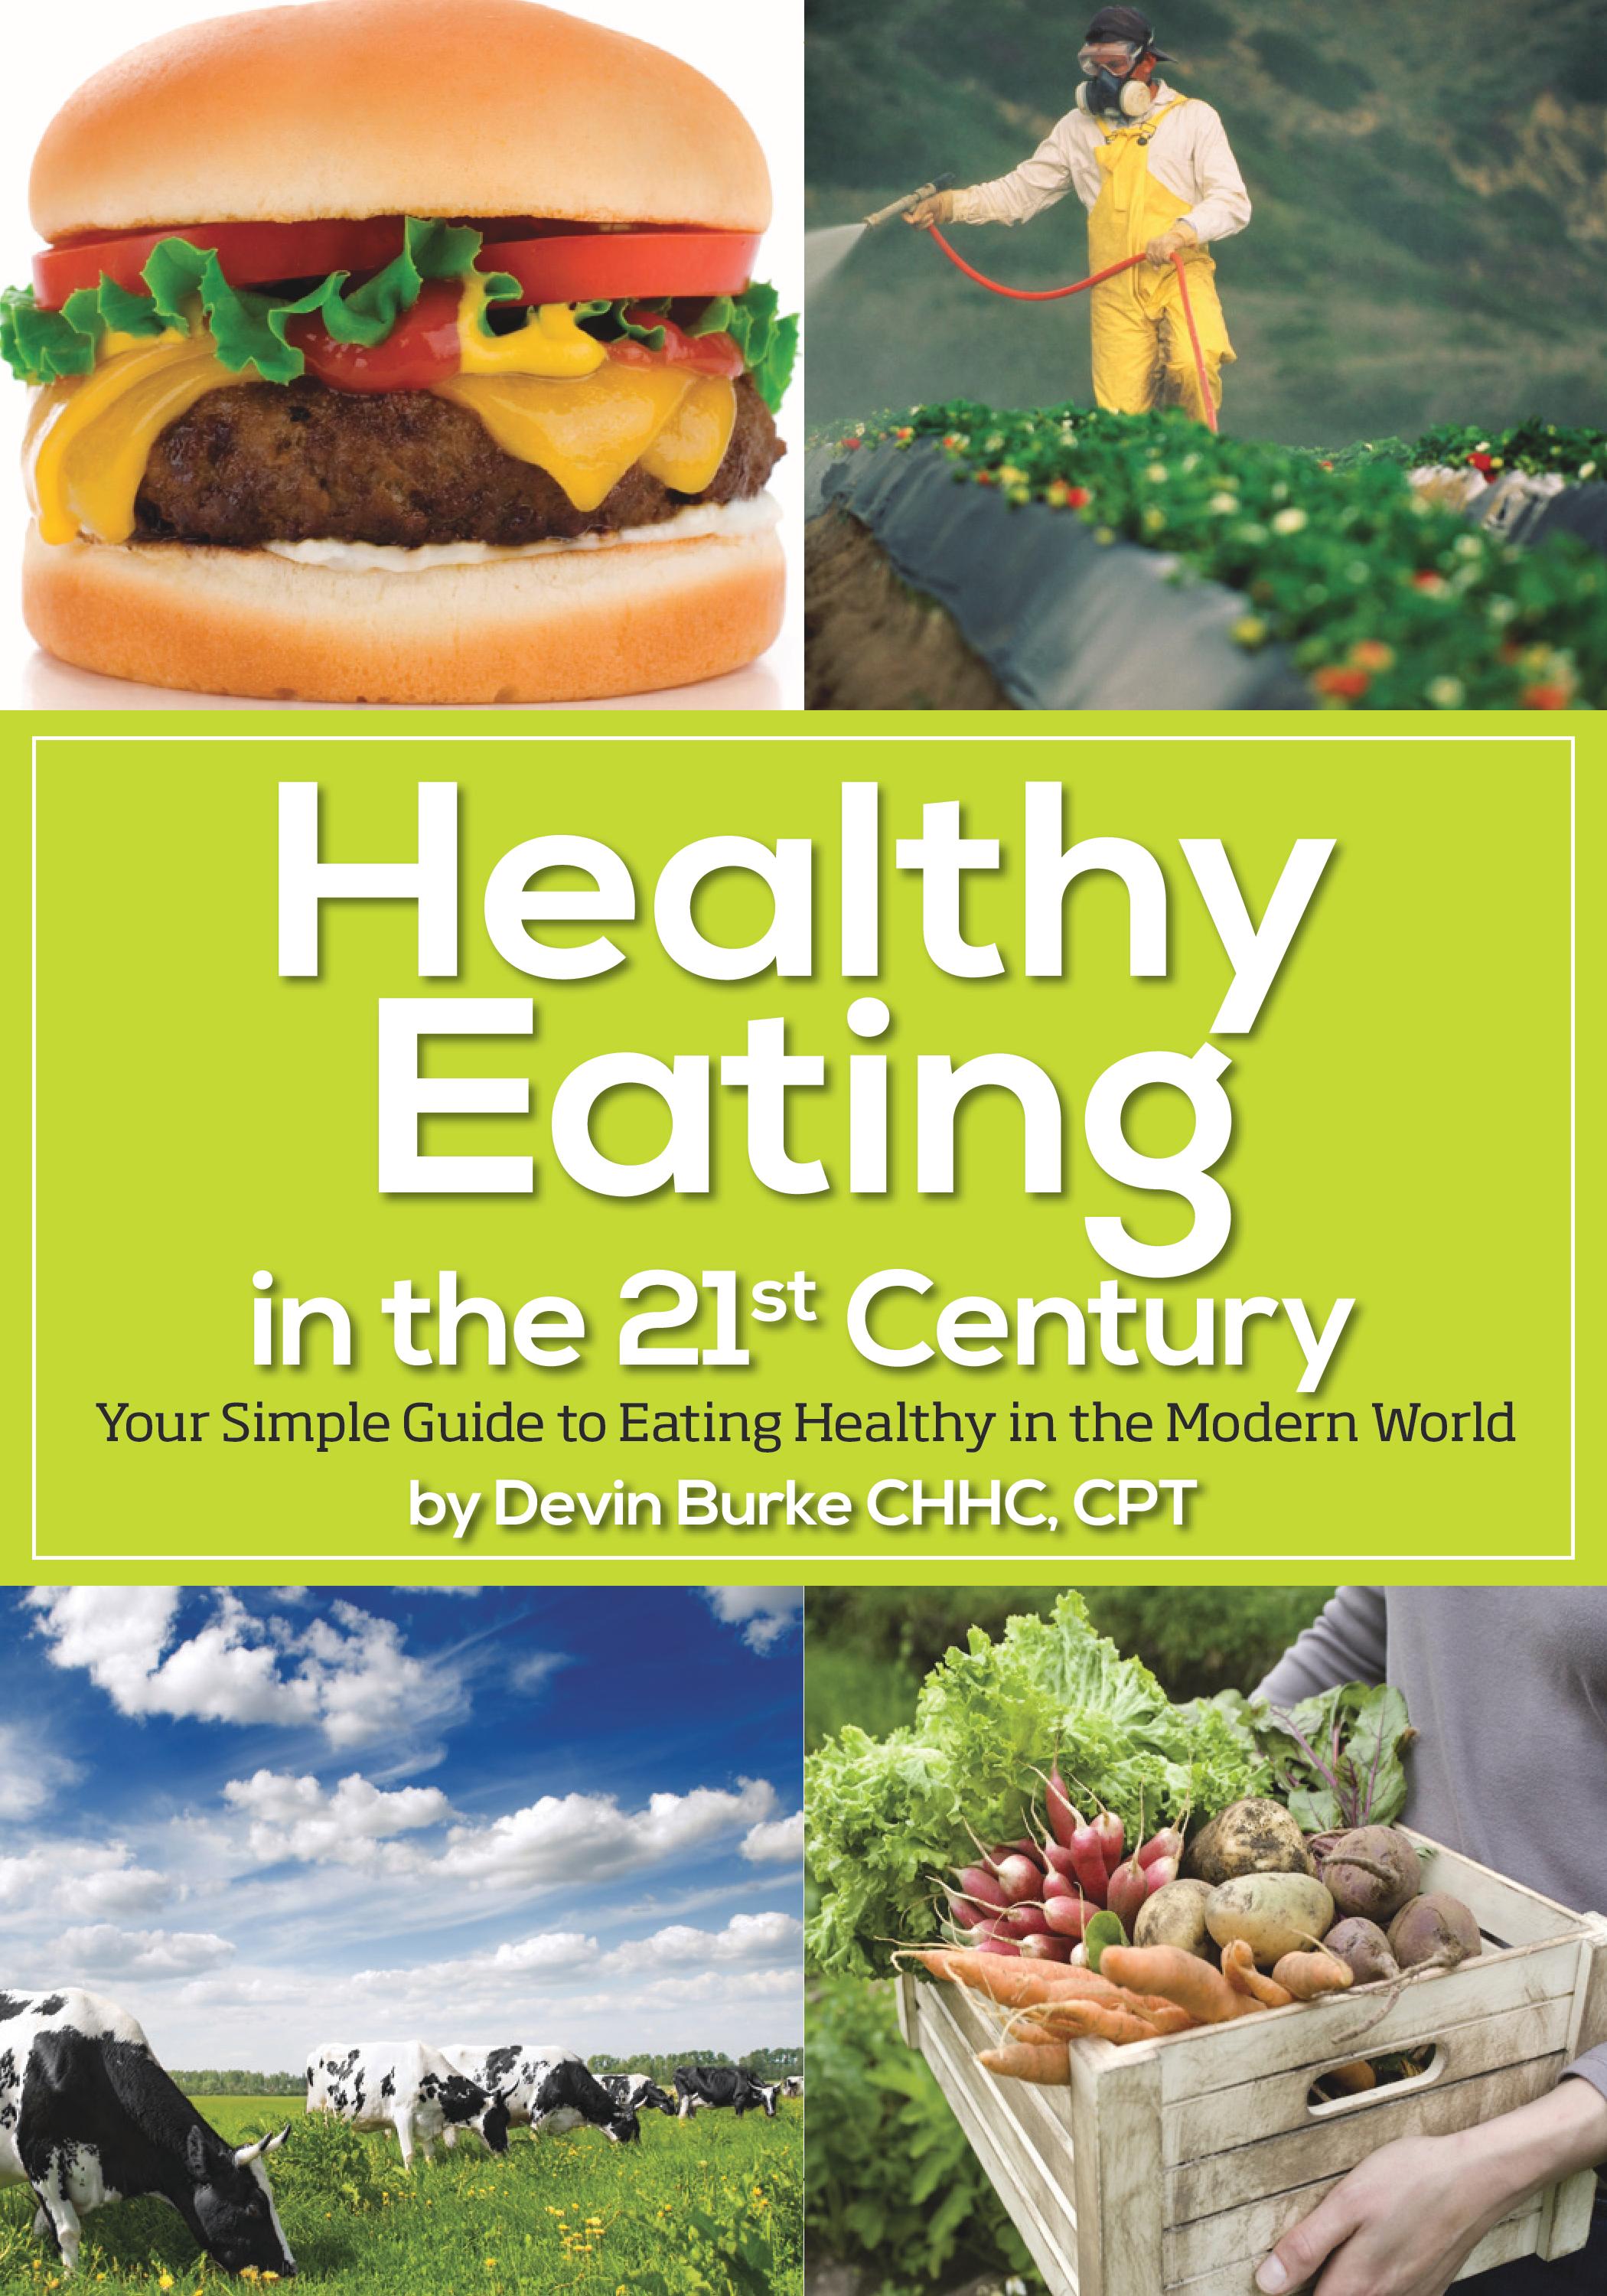 New Book Offers a Simple Guide to Eating Healthy in the Modern World (Press Release)